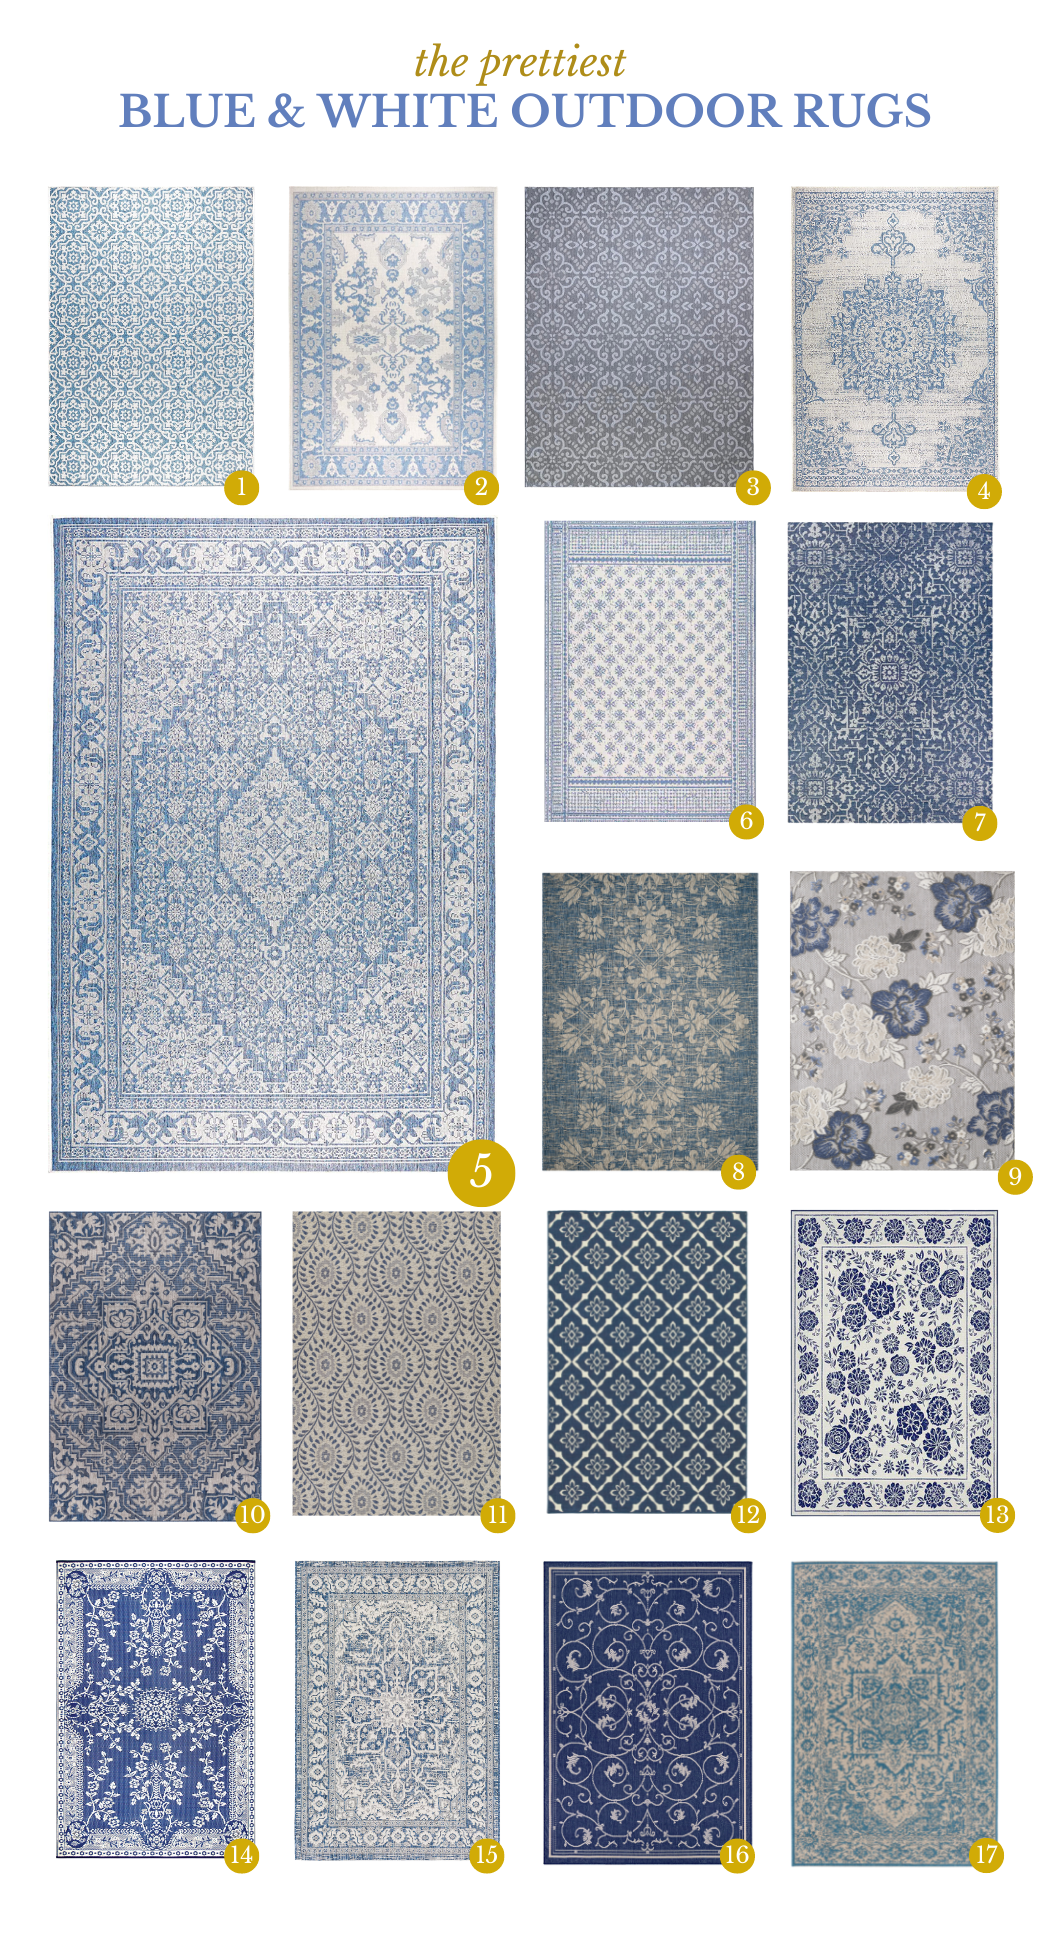 blue and white outdoor rugs, blue outdoor rugs, coastal grandmother outdoor style, grandmillennial style,  traditional outdoor rugs, transitional outdoor rugs